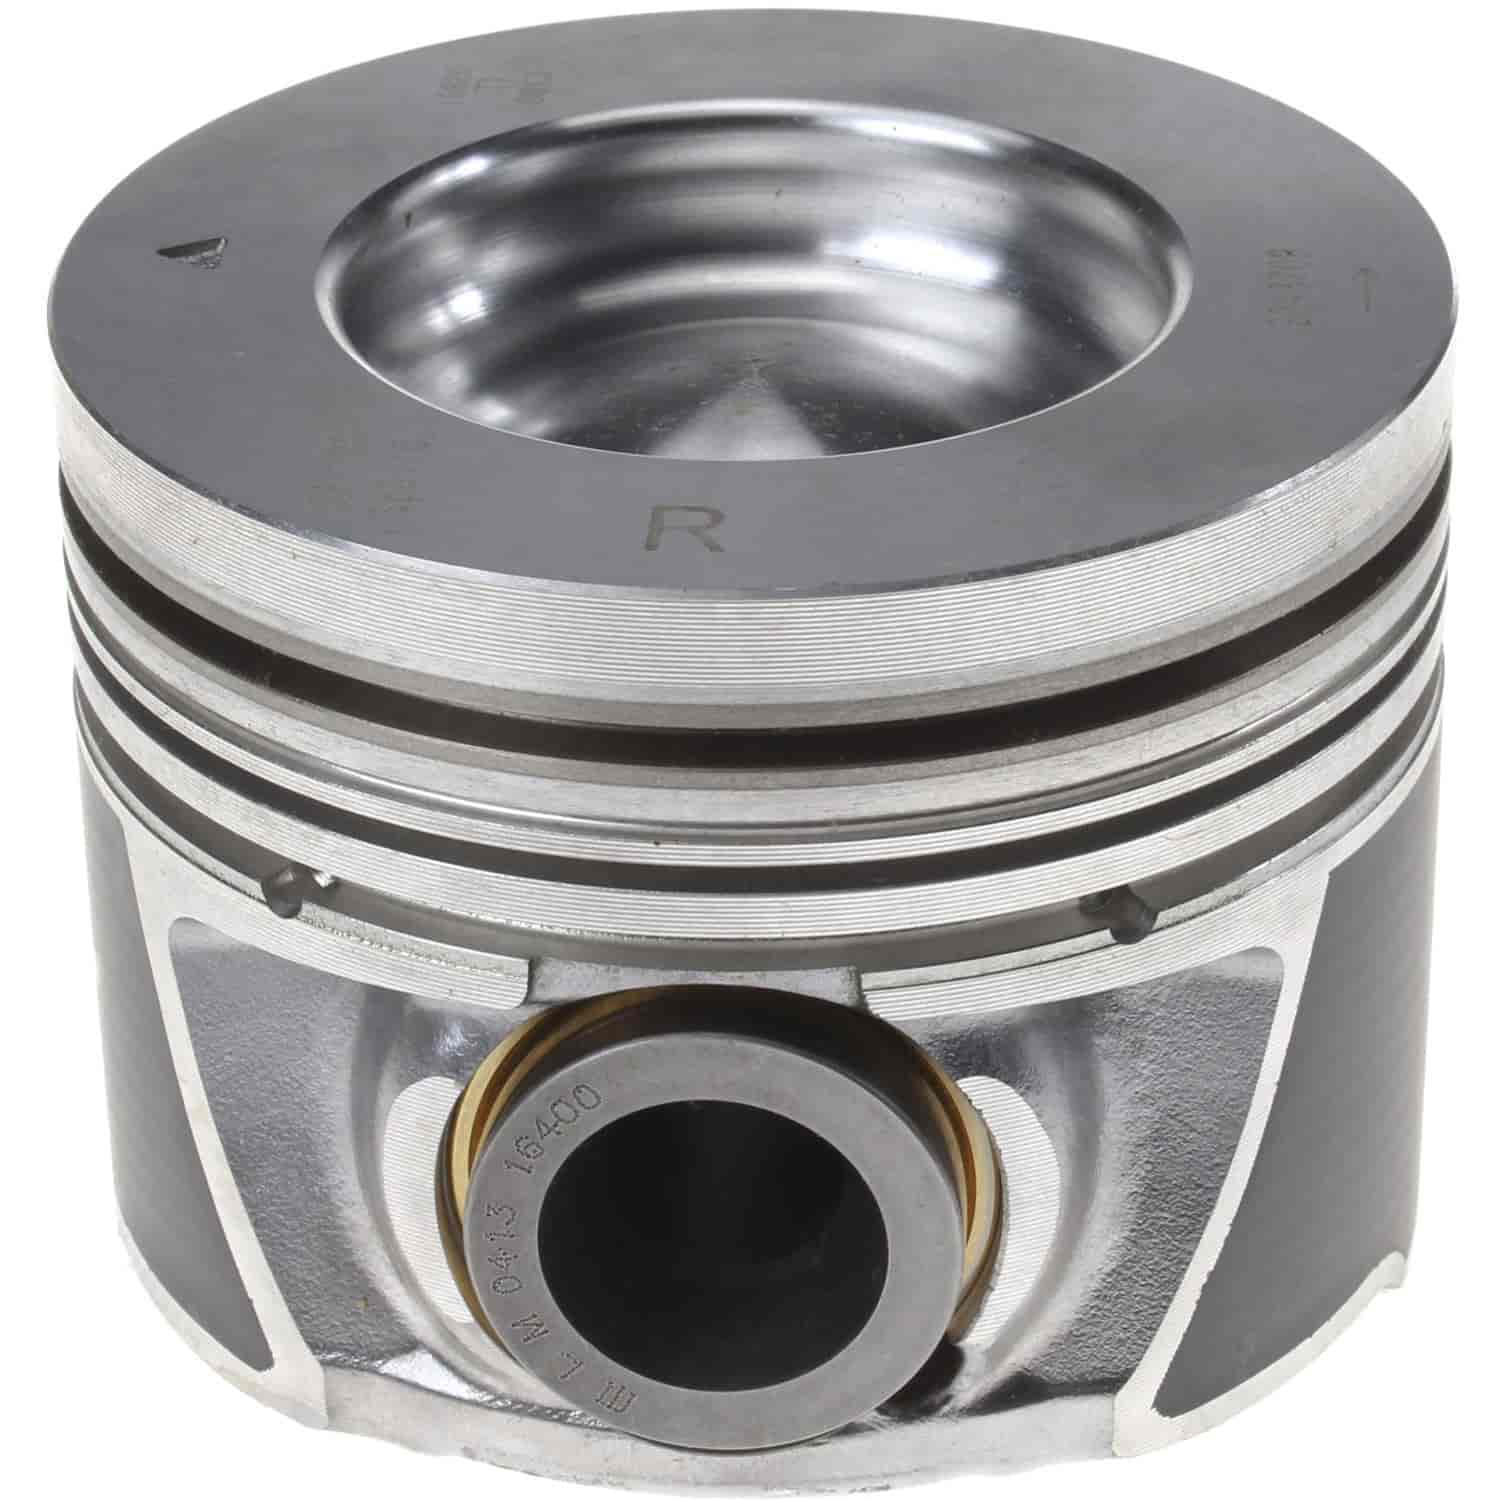 Piston 2006-2010 Chevy/GMC Duramax Diesel V8 6.6L Right Bank with 4.055" Bore (Standard)